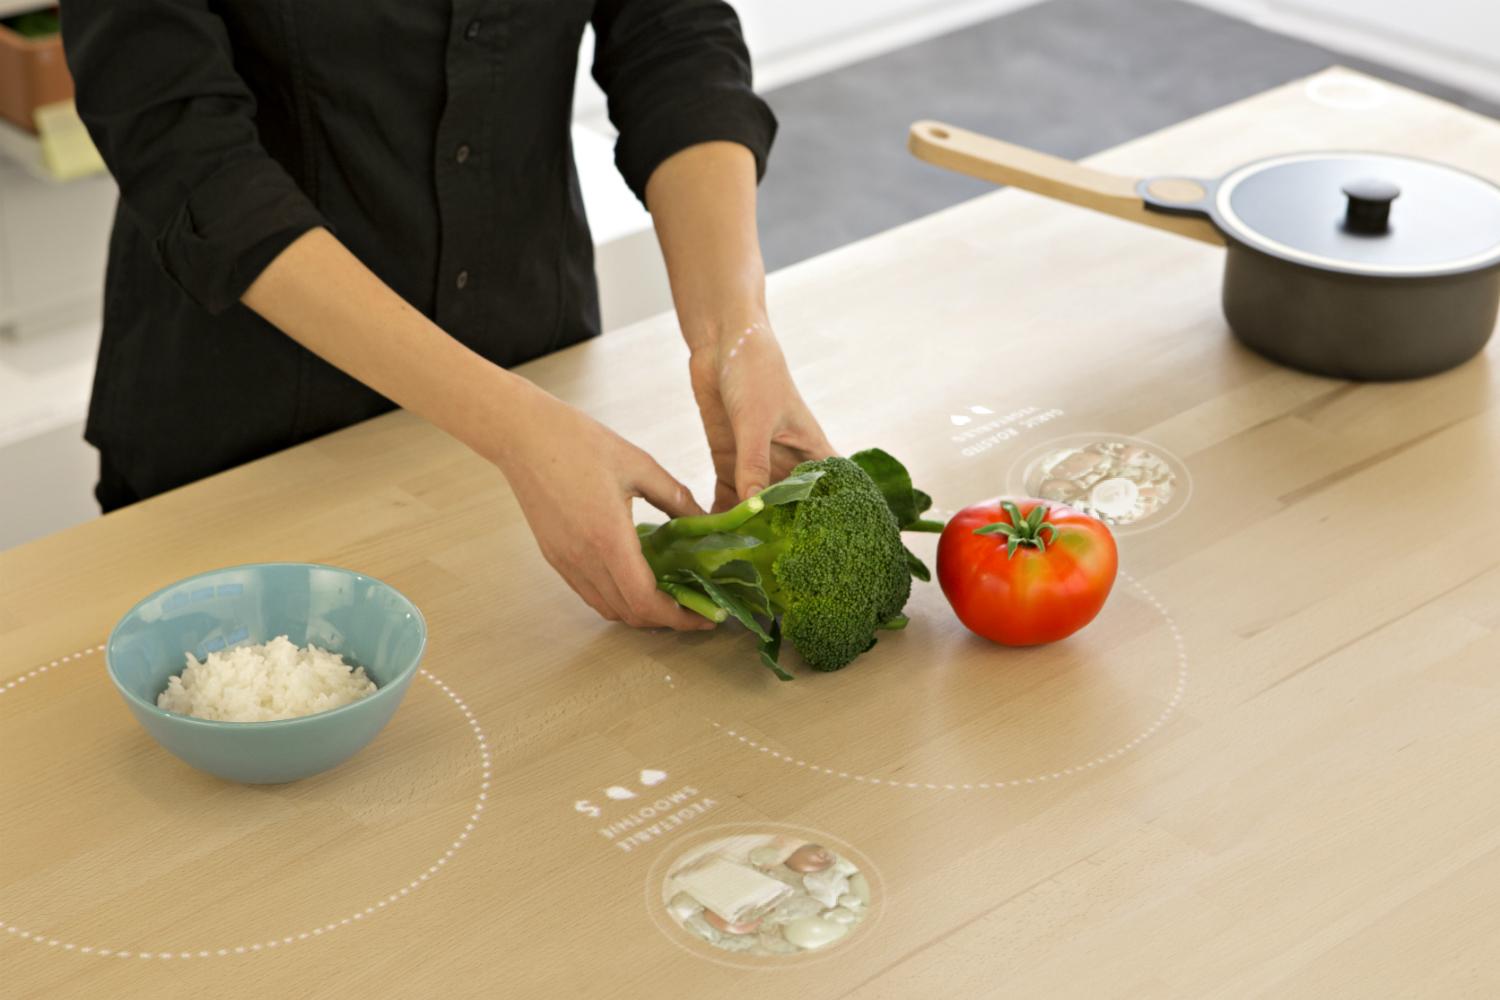 Ikeas Concept Kitchen 2025 Shows The Future Of Cooking Digital Trends